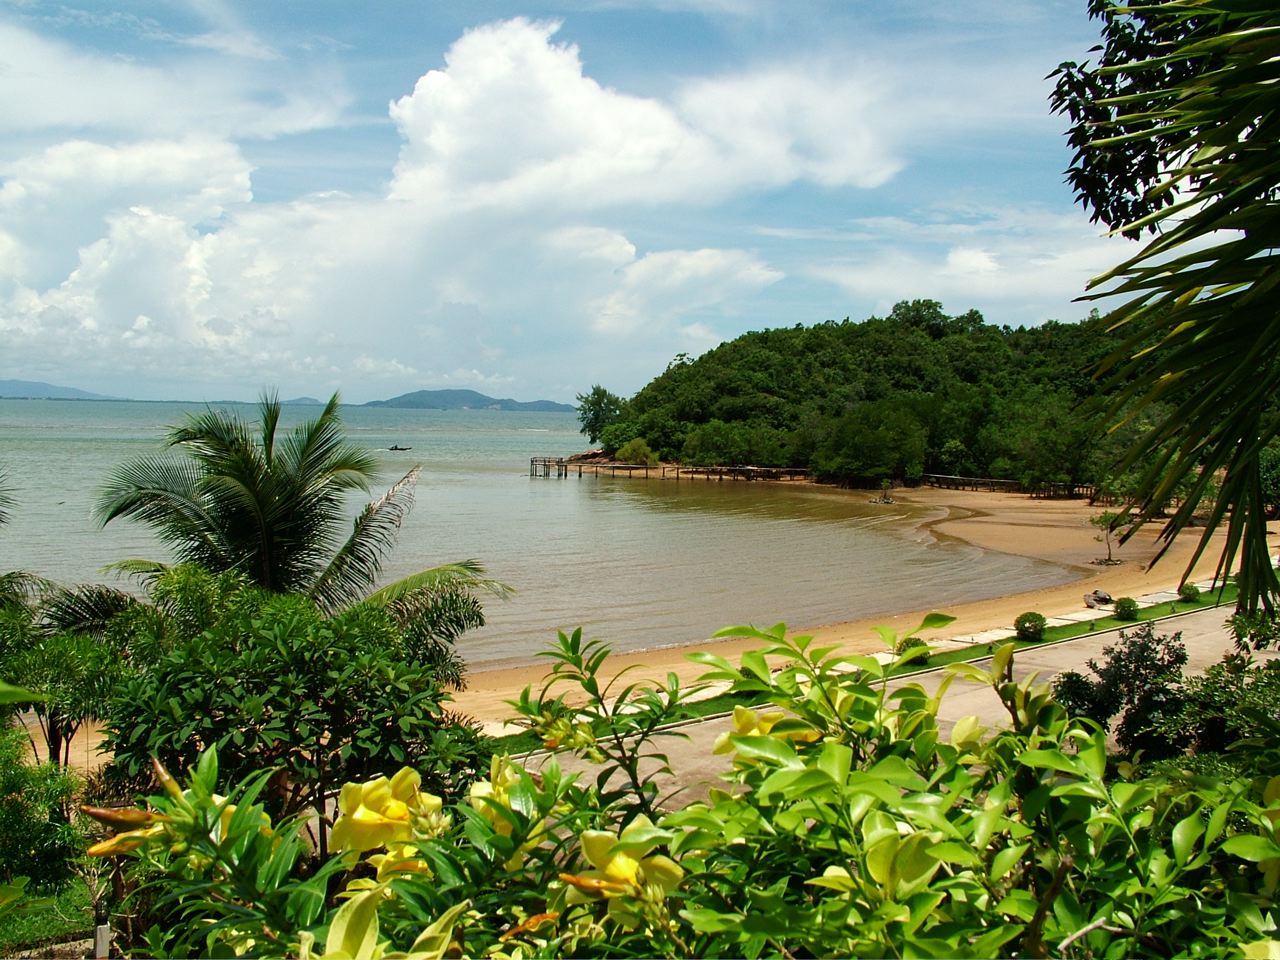 a scenic view of a sandy beach surrounded by greenery